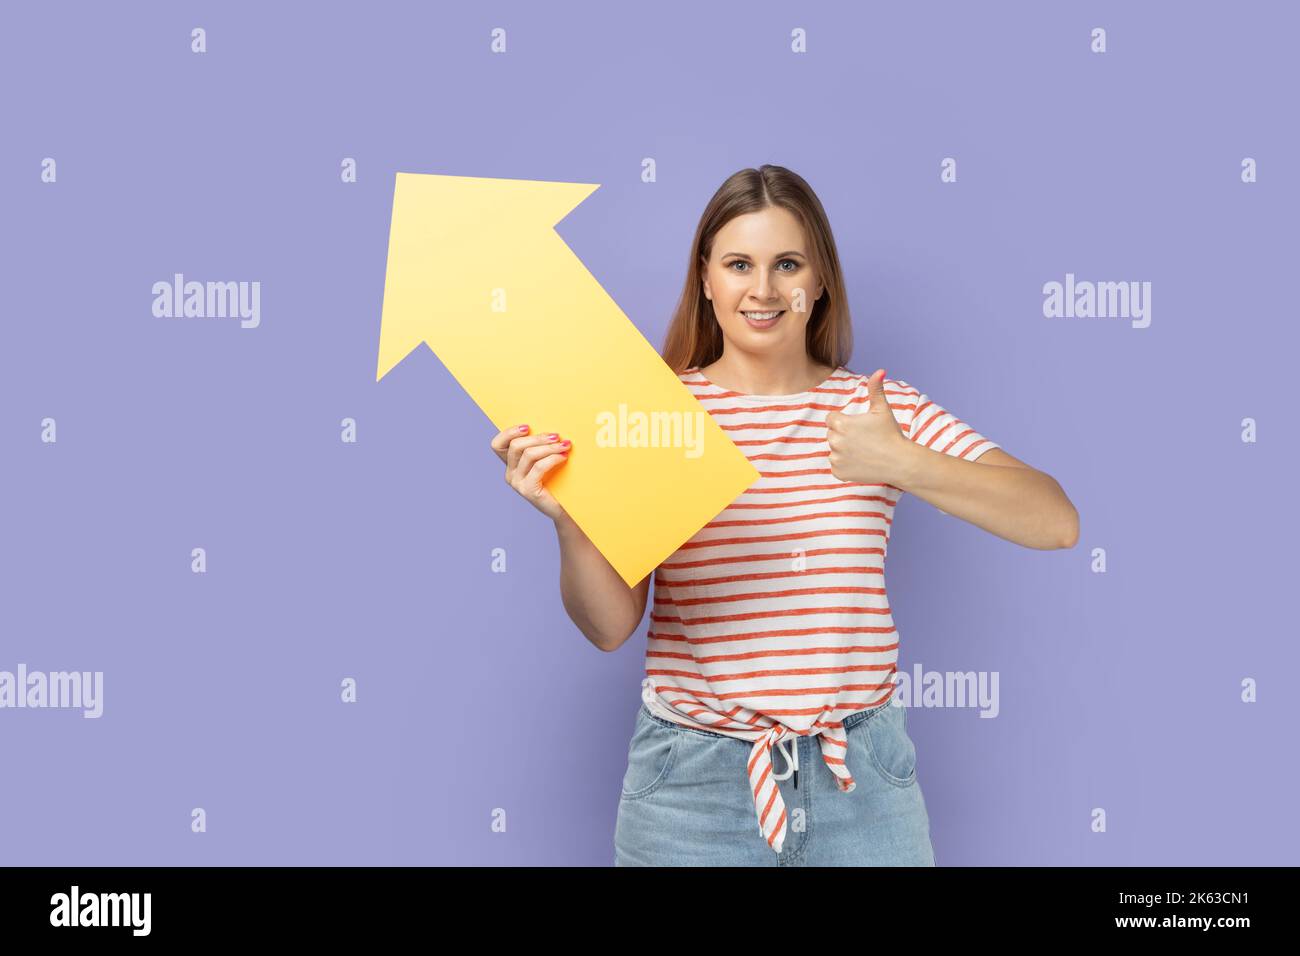 Portrait of pretty smiling blond woman wearing striped T-shirt holding big yellow arrow pointing aside and showing thumb up, like gesture. Indoor studio shot isolated on purple background. Stock Photo